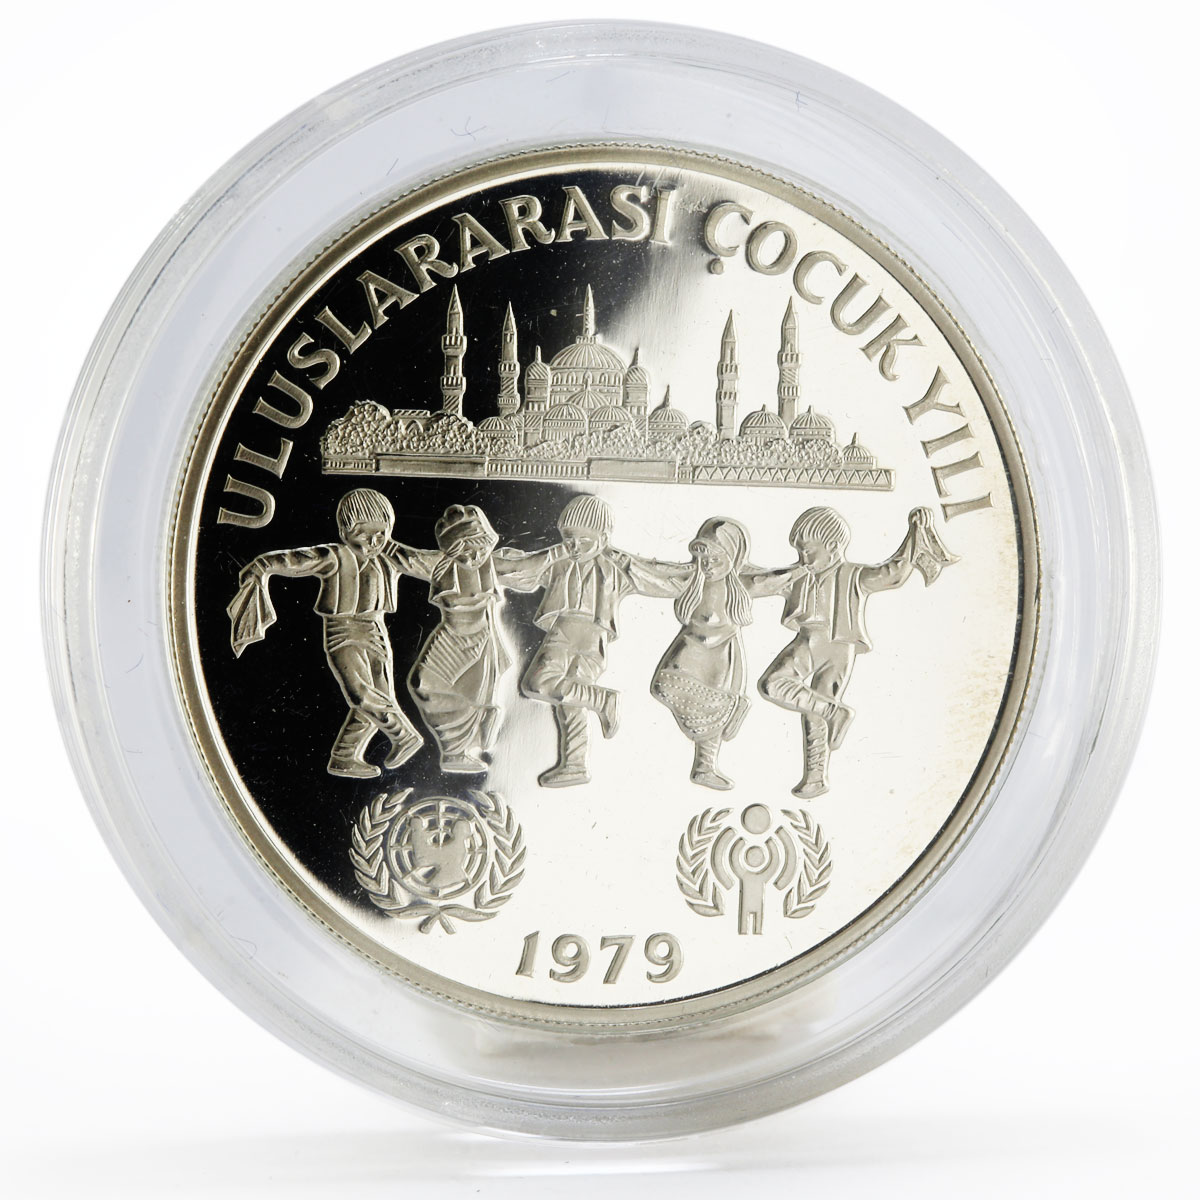 Turkey 500 liras International Day of the Child proof silver coin 1979